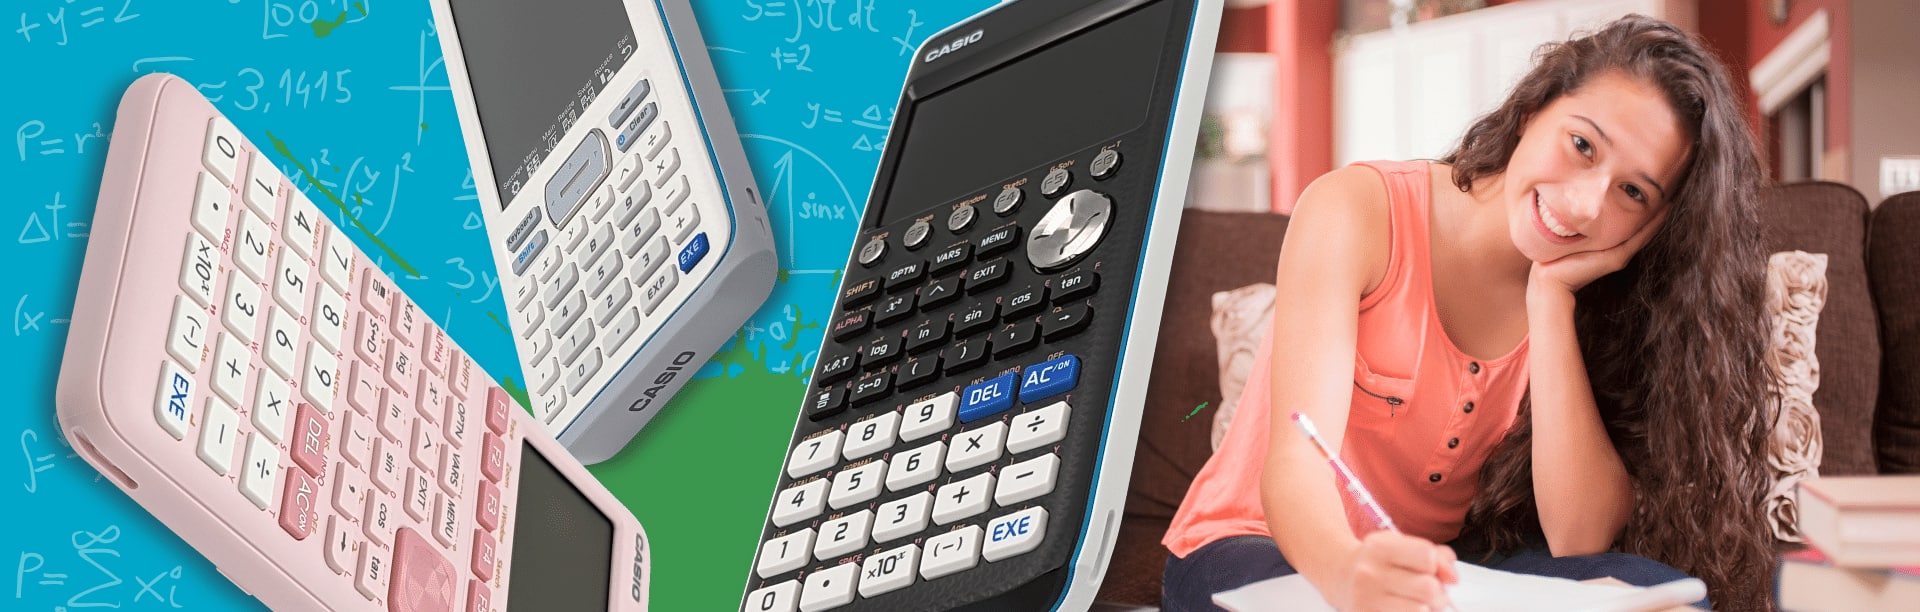 Casio Graphing Calculator Banner